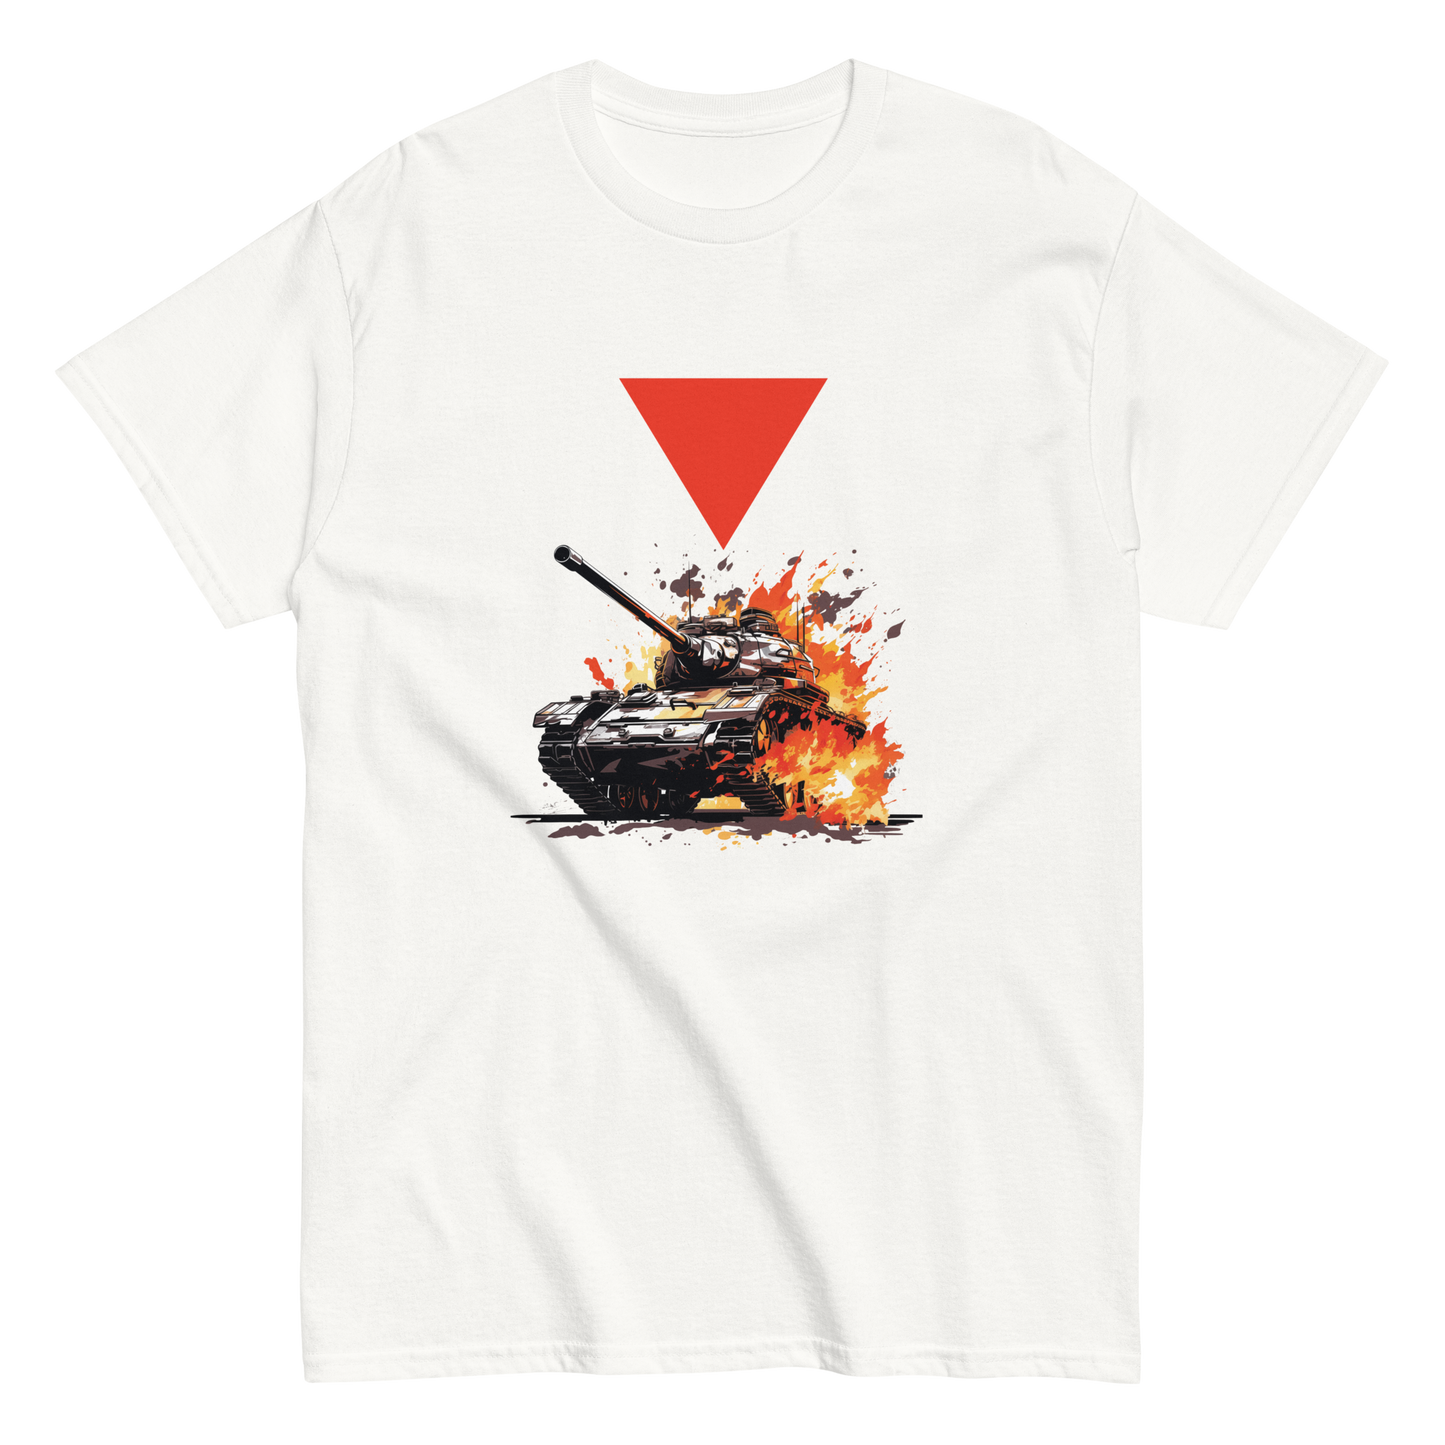 Red Inverted Arrow T-Shirt